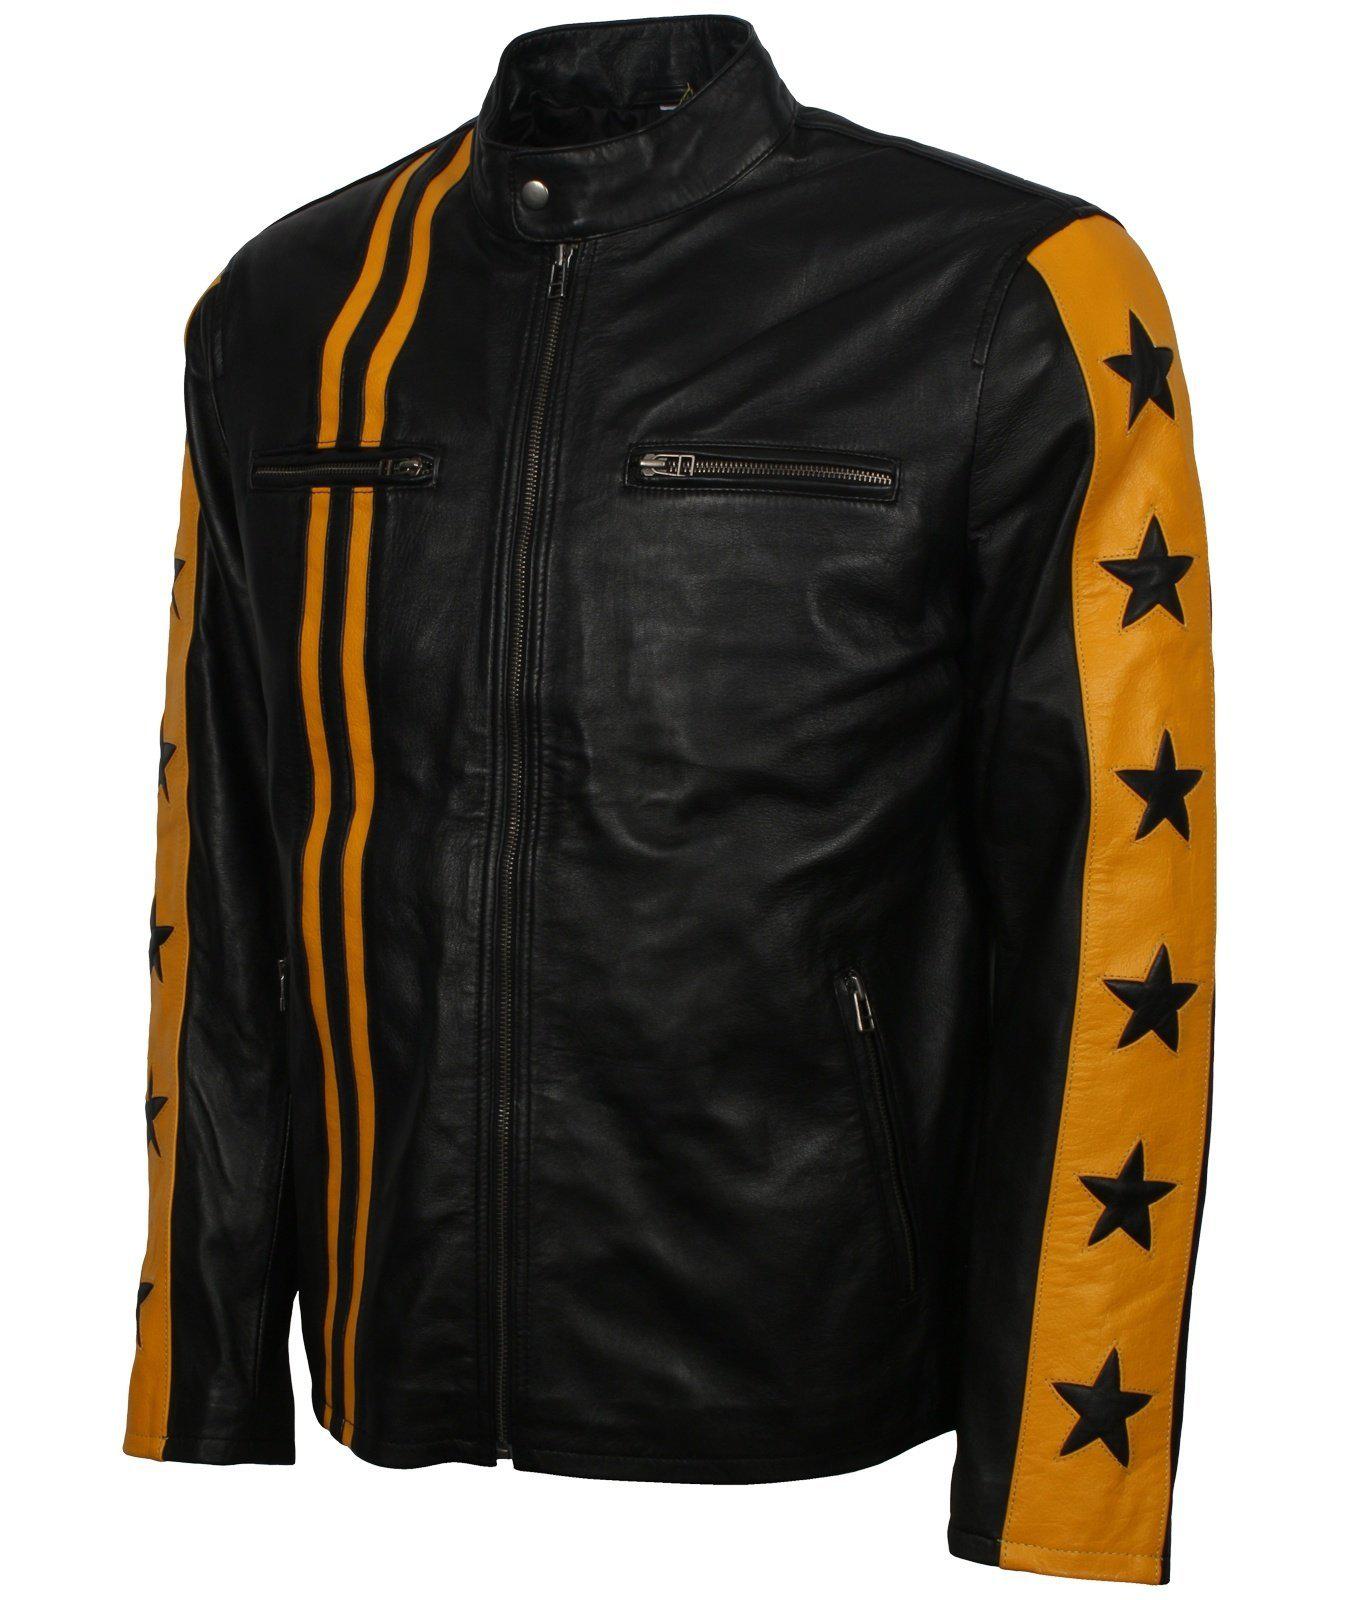 Men's Vintage Black Leather Motorcycle Jacket with Yellow Stripes